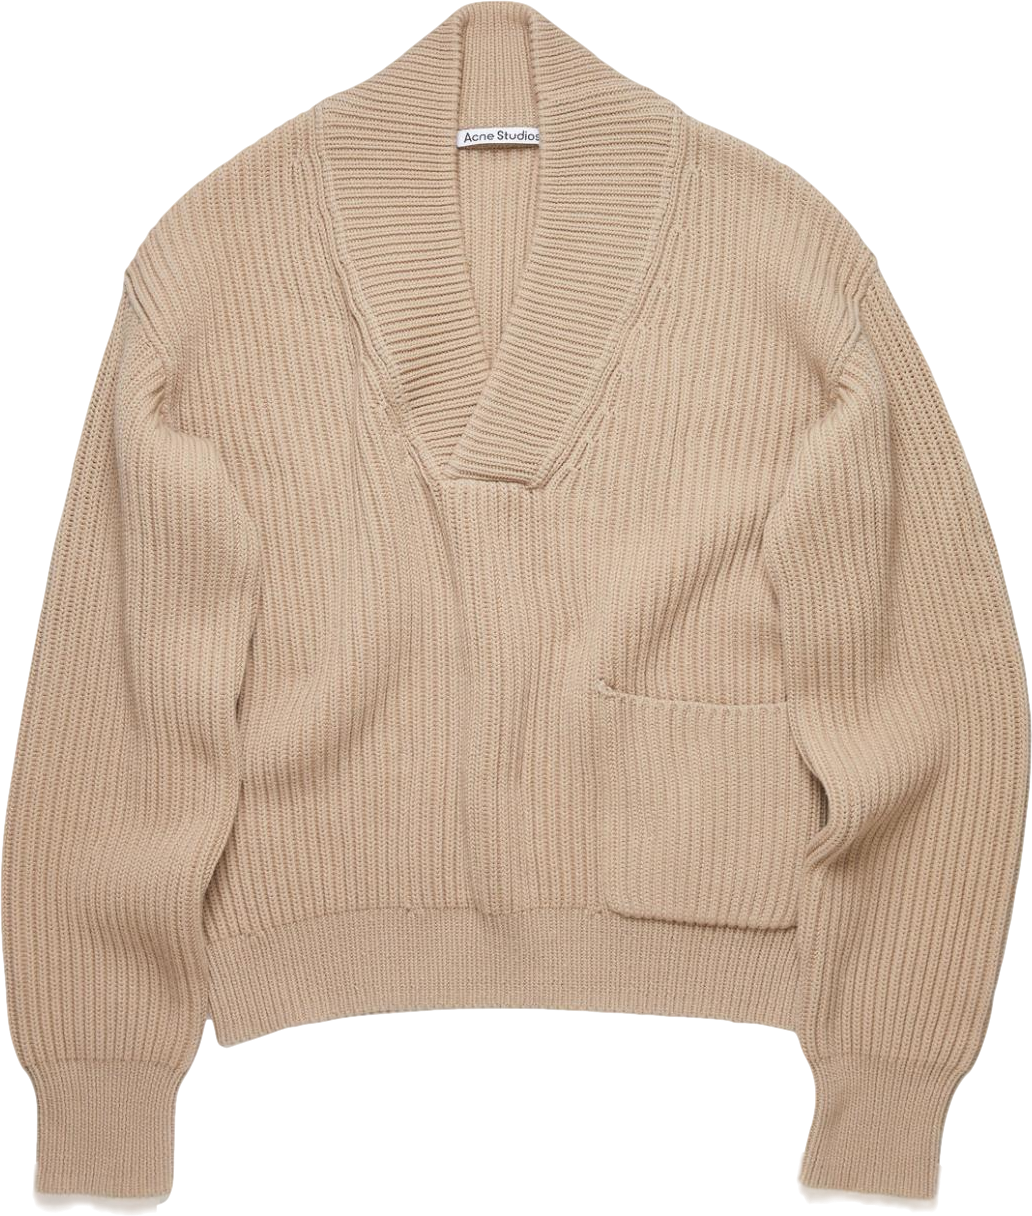 Acne Studios Beige Ribbed Cotton Blend Relaxed Fit Jumper UK M